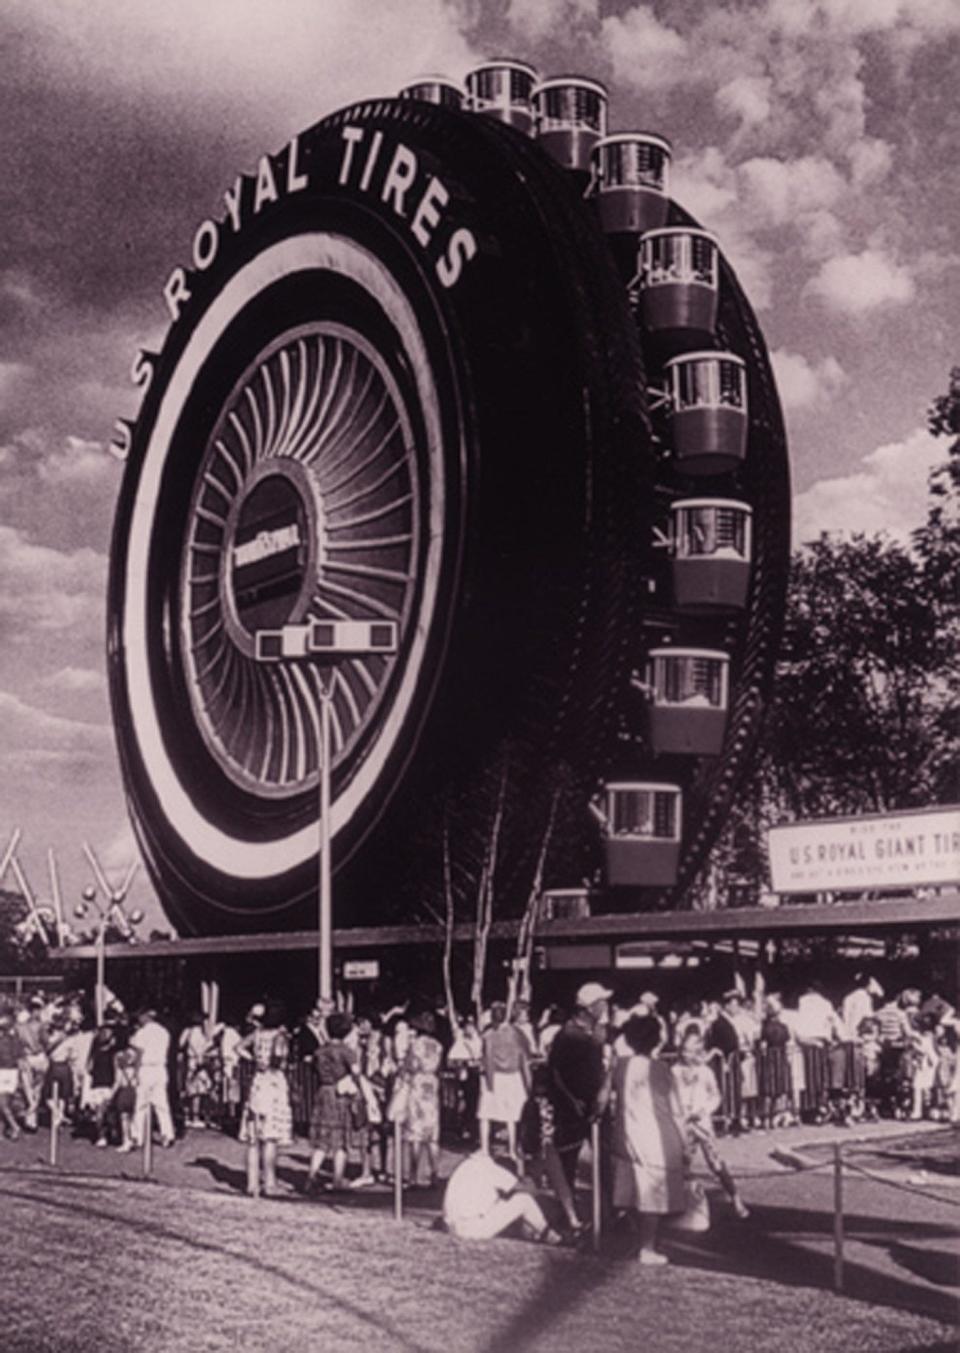 Uniroyal giant tire was created as a Ferris wheel at the 1964/65 New York World's Fair.